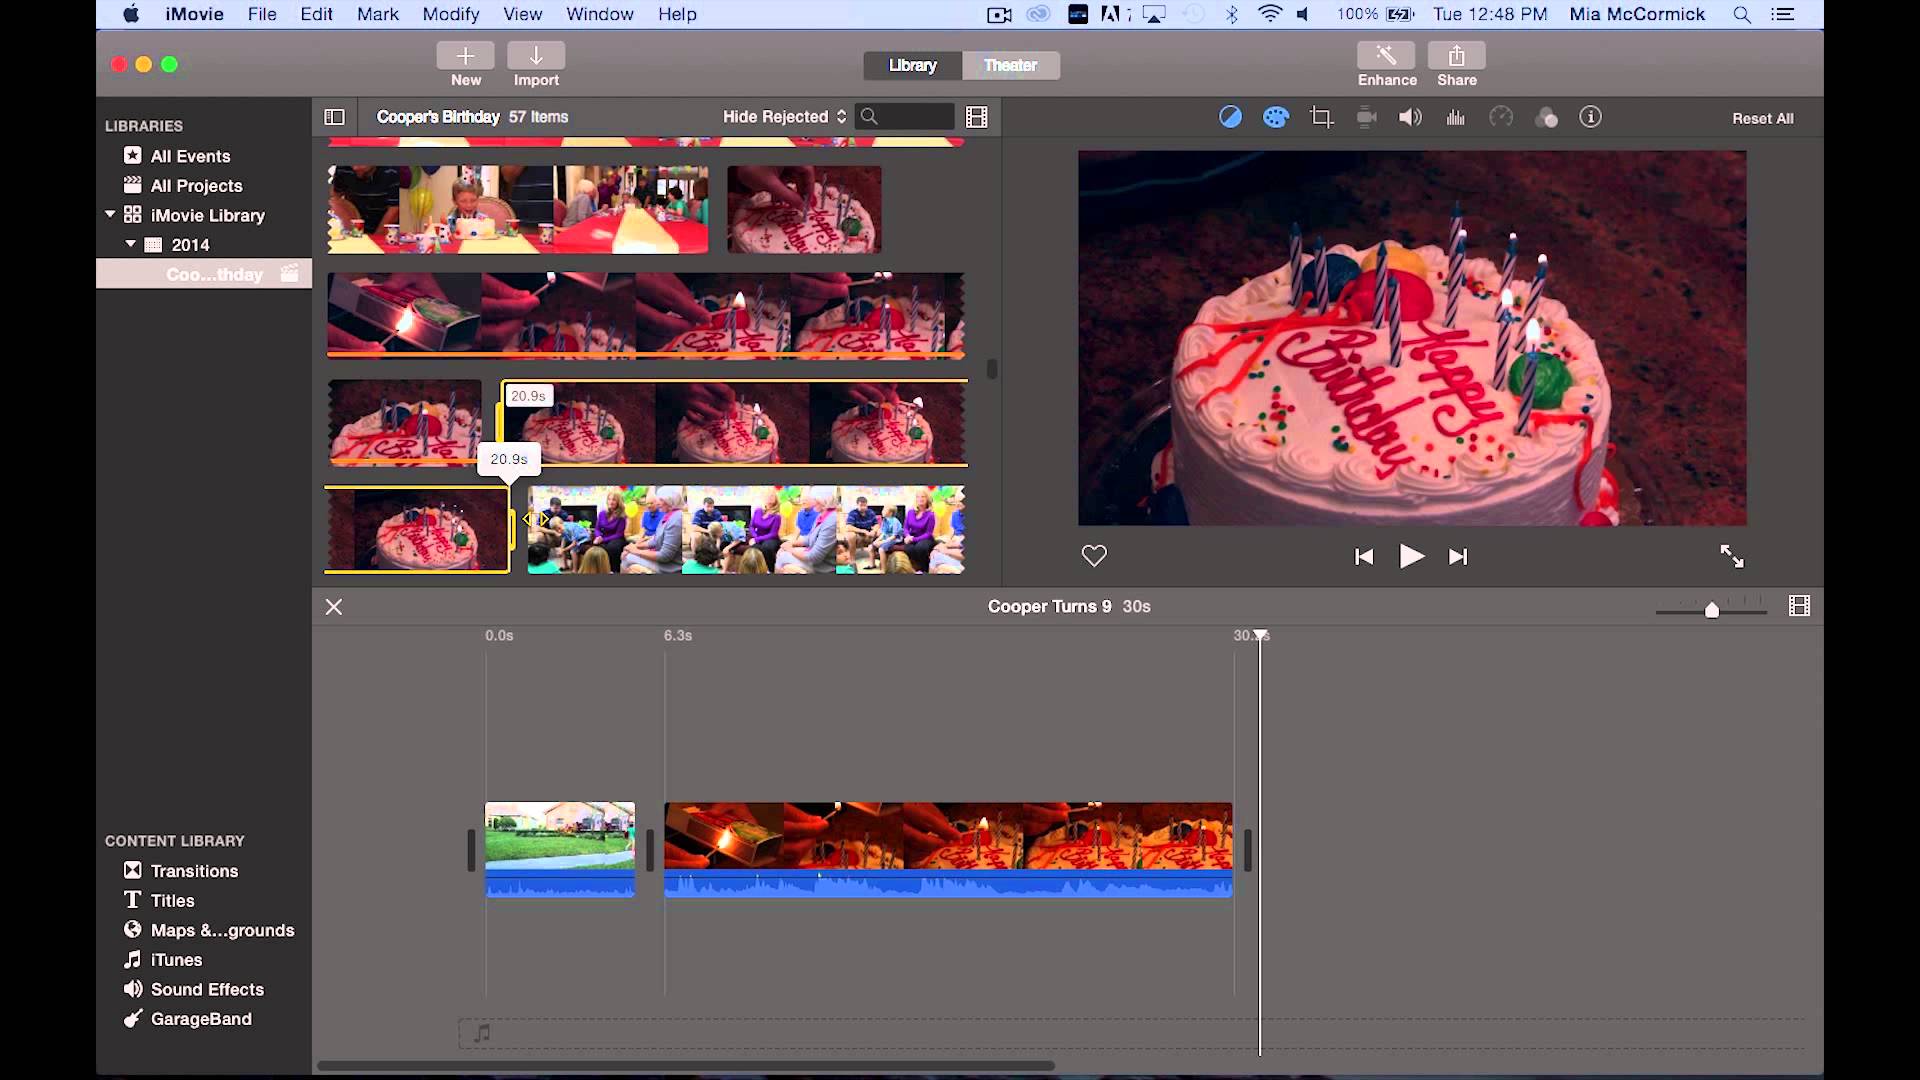 Canon: Demystifying HD Video on a DSLR Camera: Lesson 4 – Editing and Sharing on iMovie